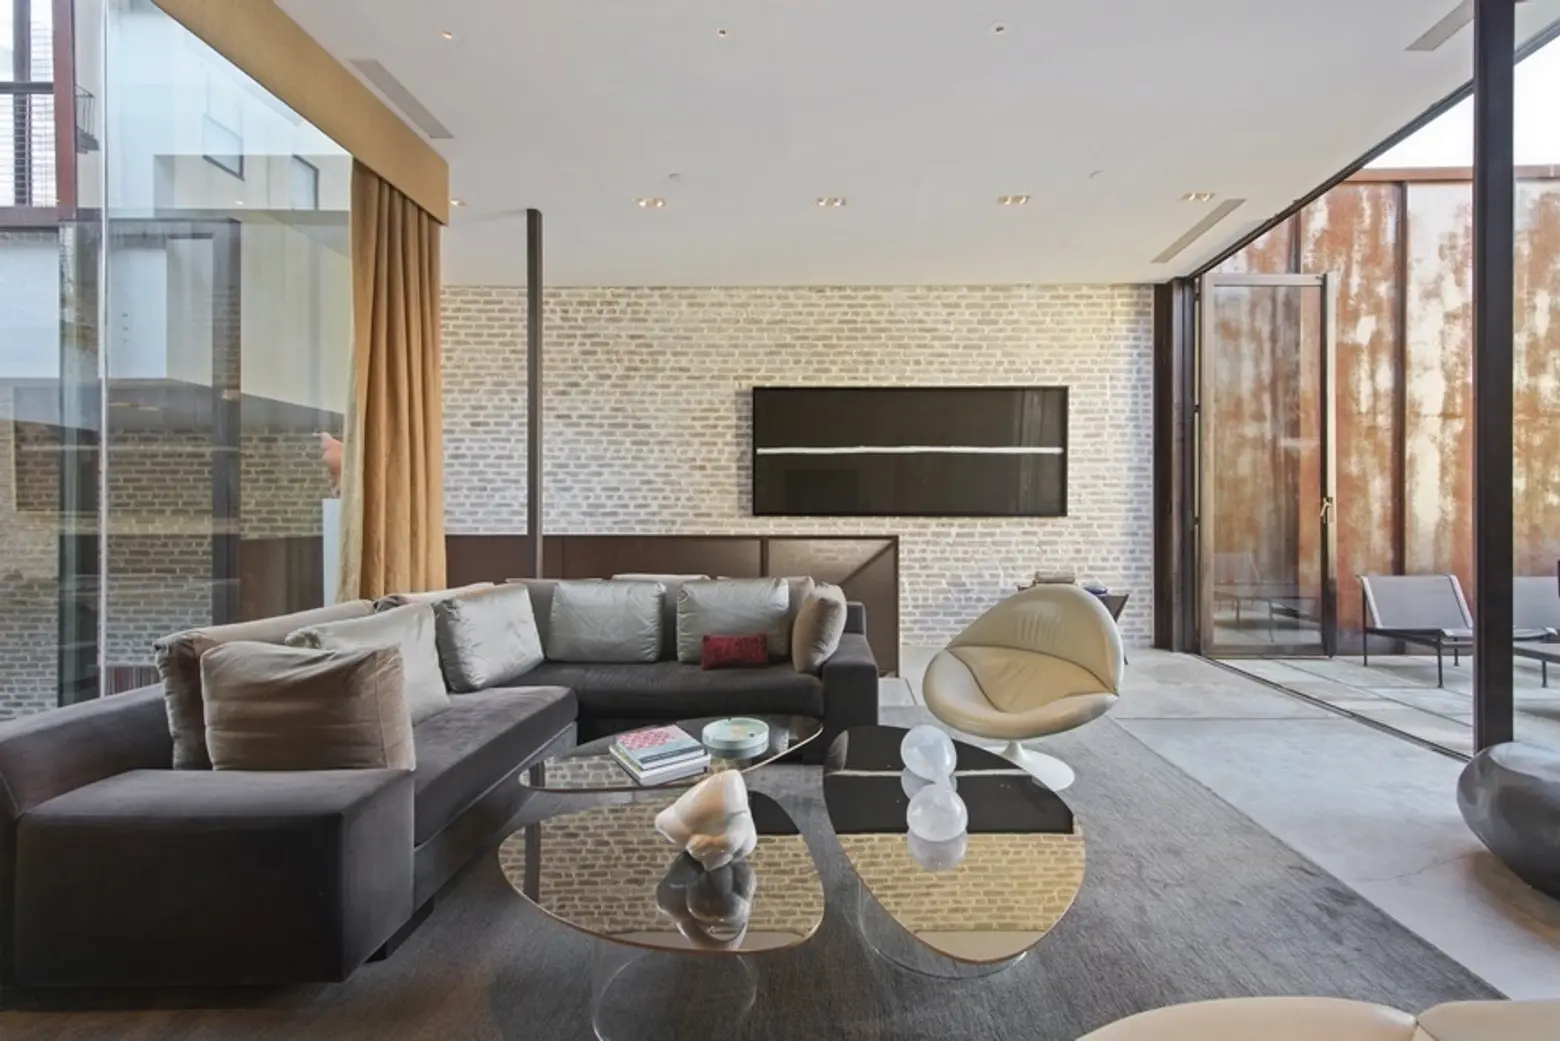 75 Warren Street, Tribeca, Townhouse, Interiors, Architecture, Dean Wolf Architects, Inverted Warehouse Townhouse, Corten, cool listings, manhattan townhouse for sale, modern townhouse